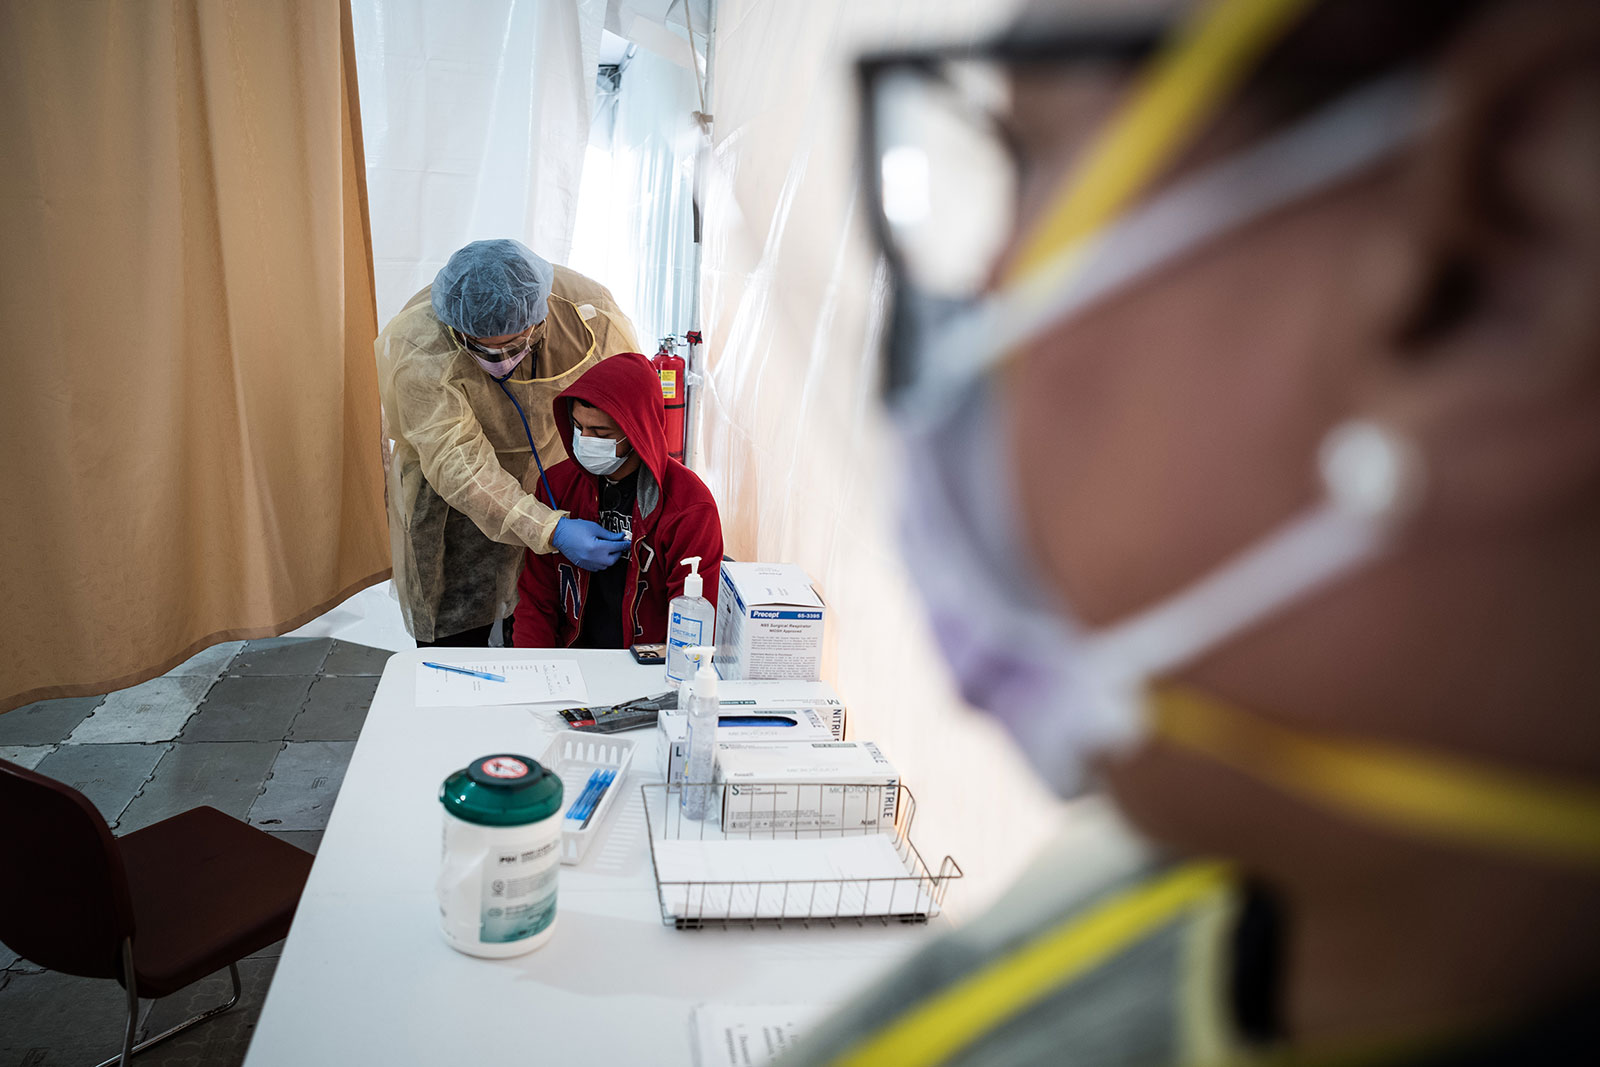 A doctor examines Juan Vasquez inside a testing tent at St. Barnabas hospital in New York City on March 20.